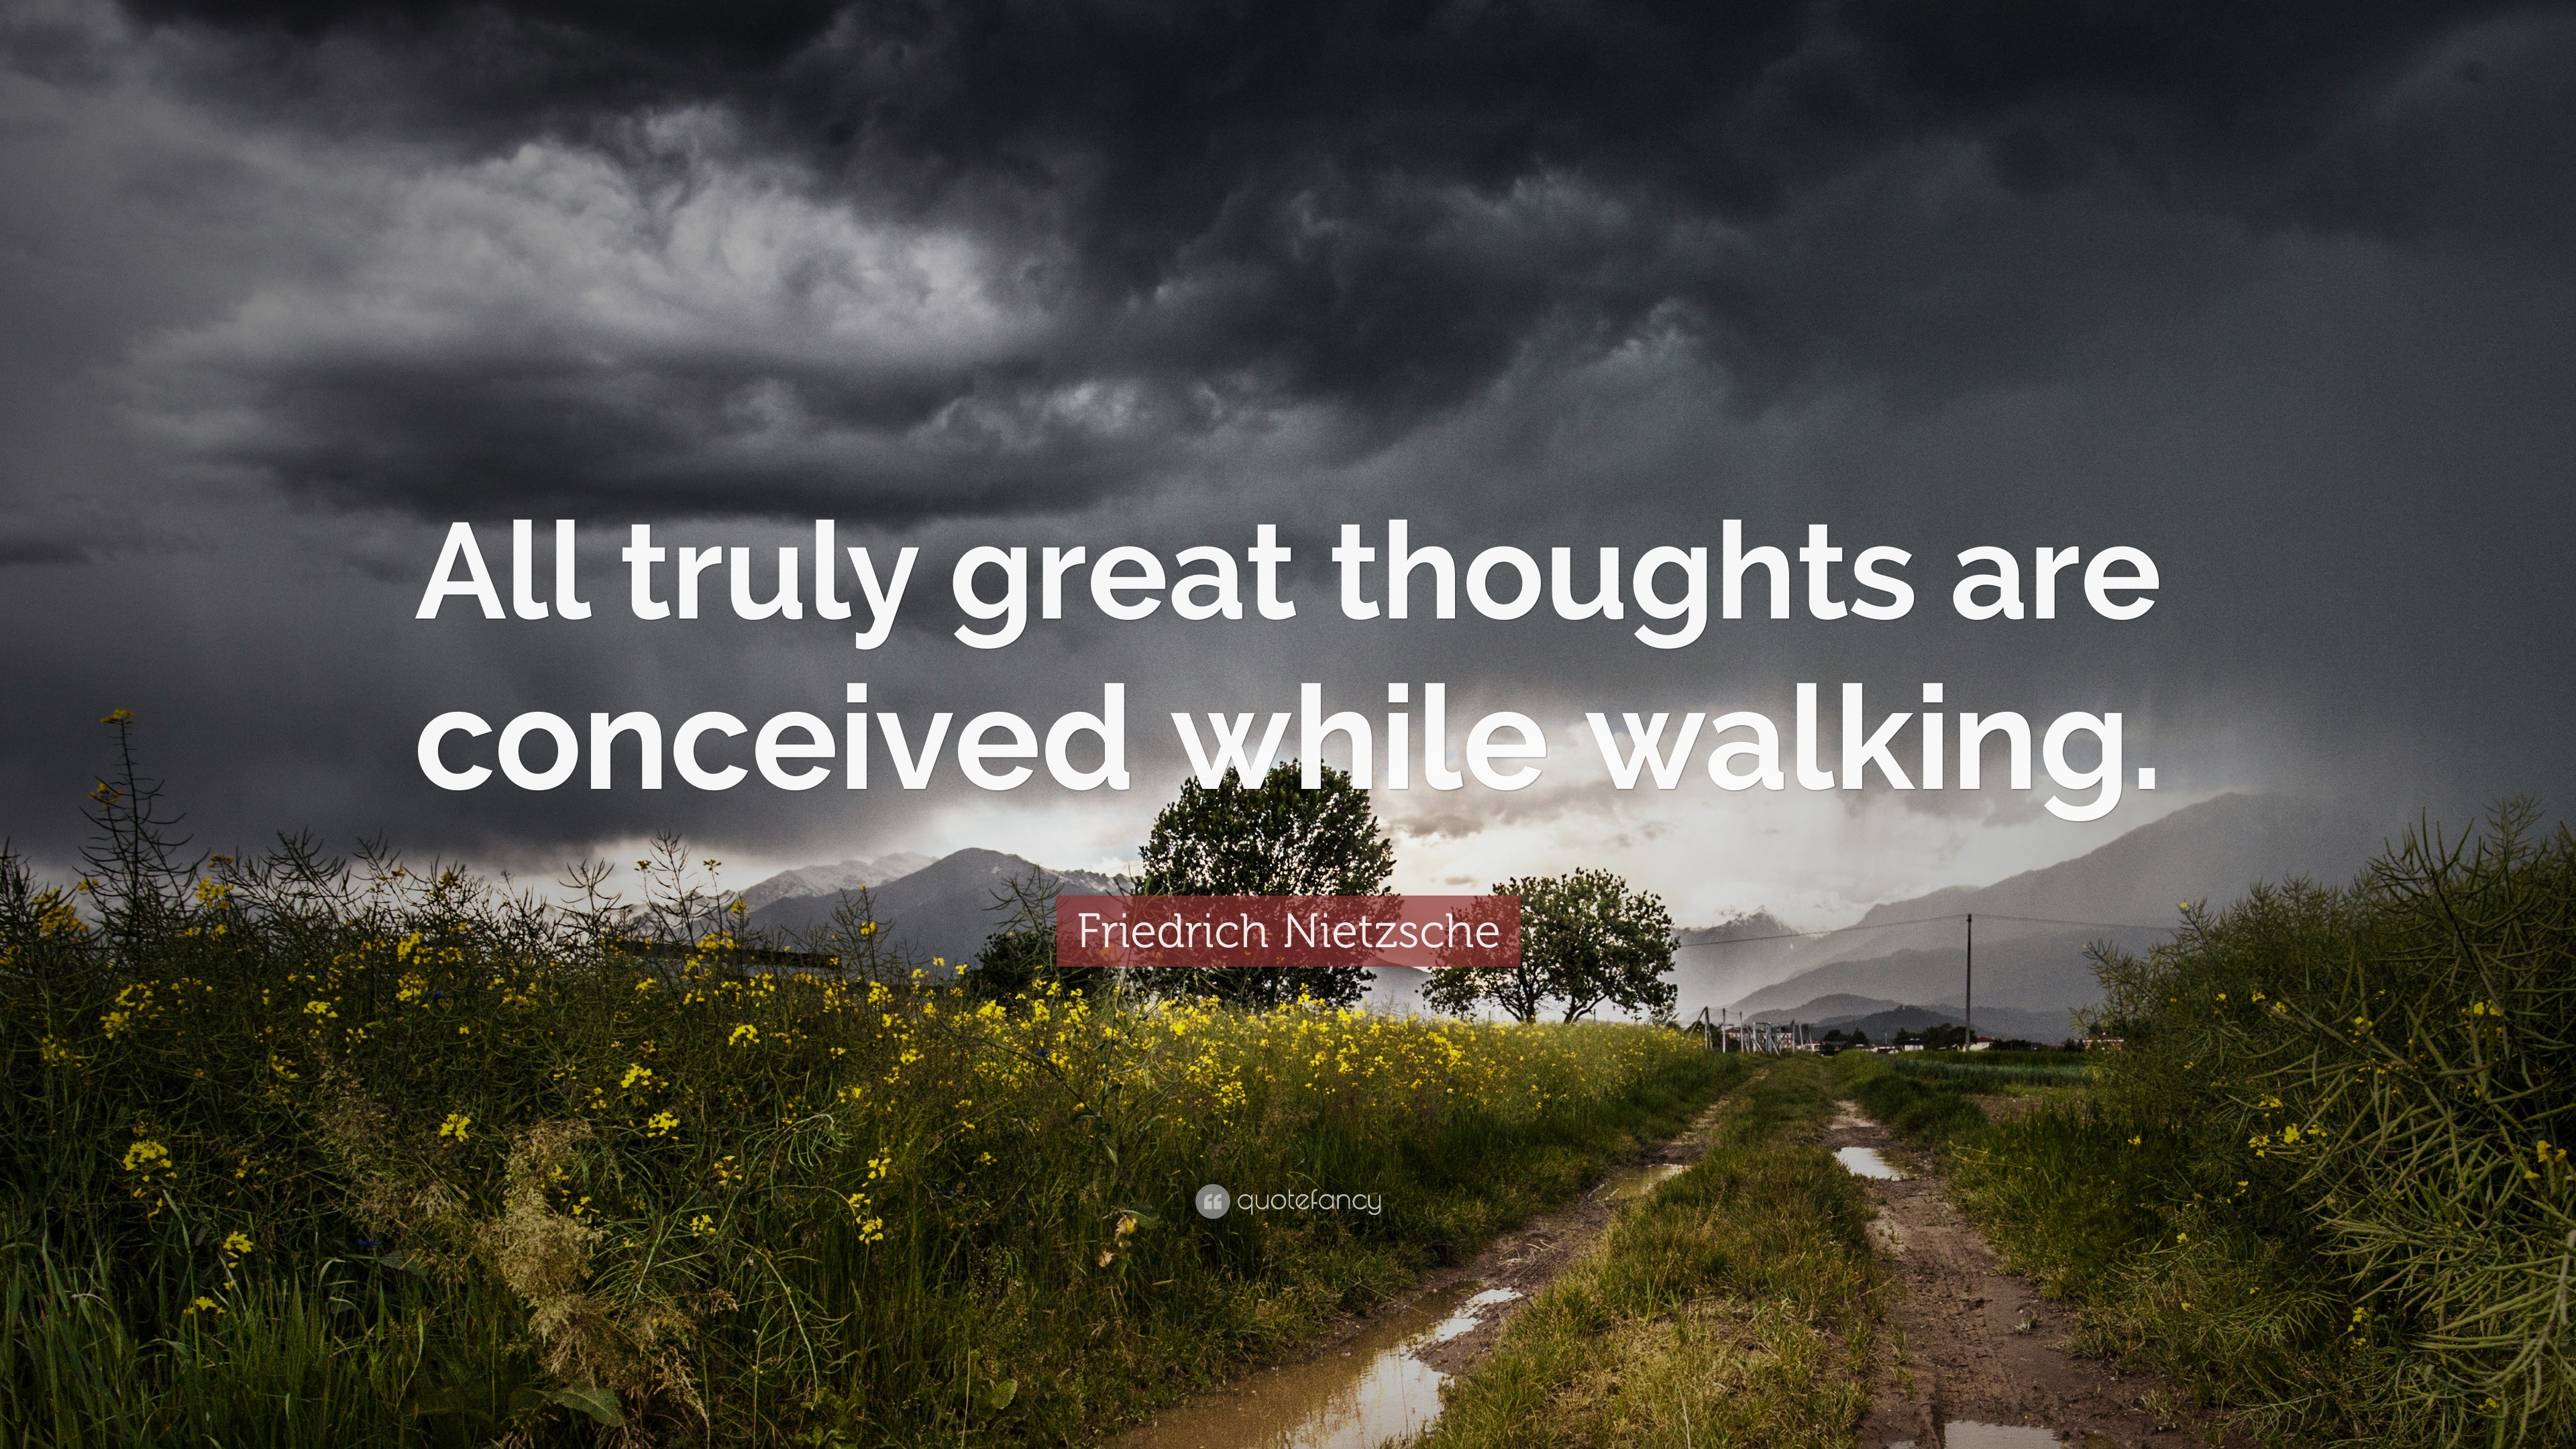 8 best Walking Quotes images on Pinterest | Walking quotes 